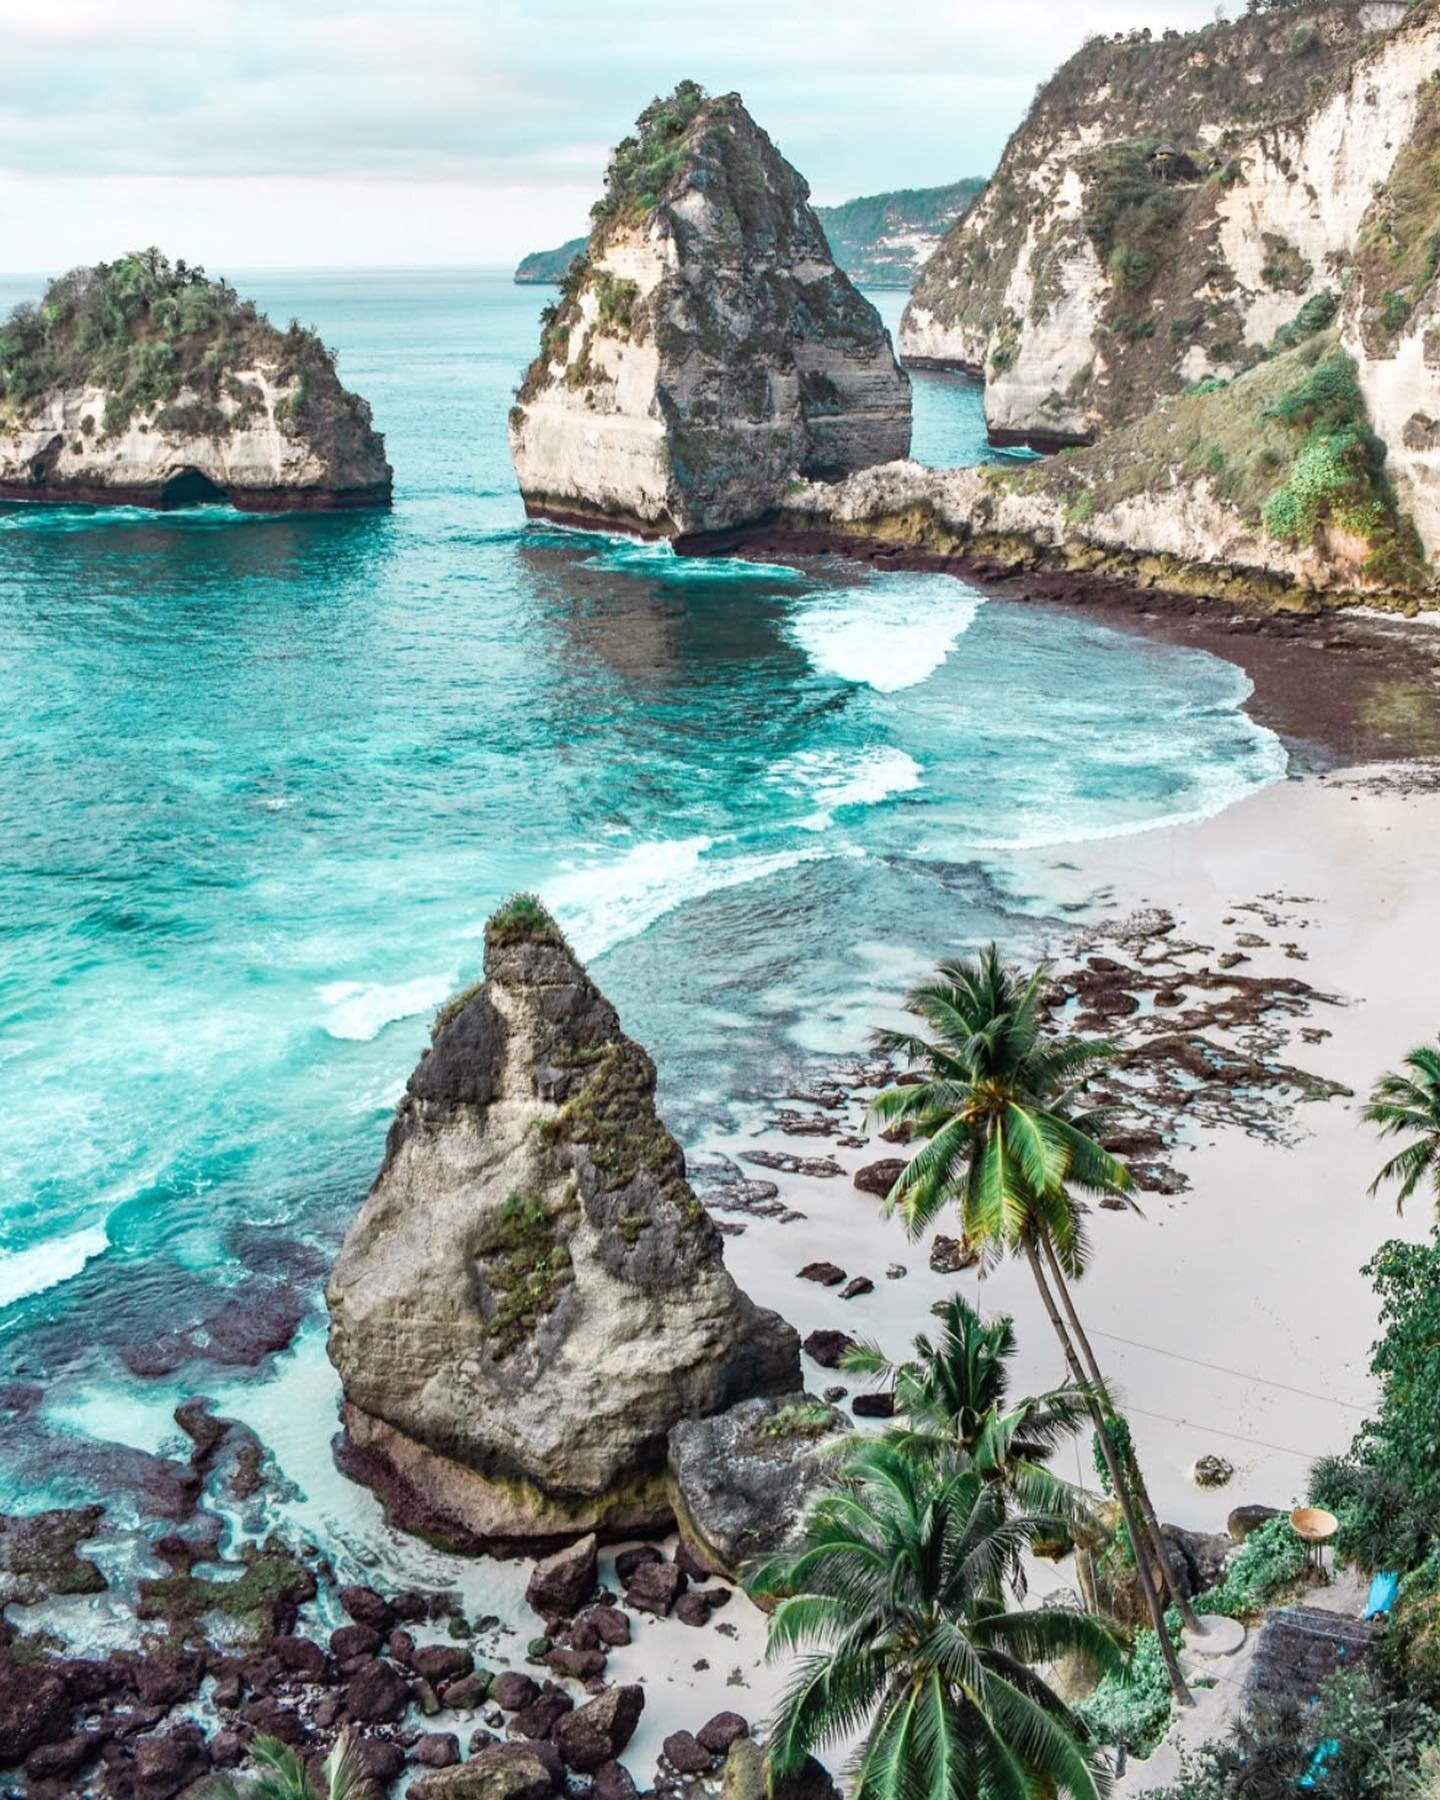 Pro tip: the ONLY way to do Nusa Penida is to wake up at 6 am to beat the crowds.